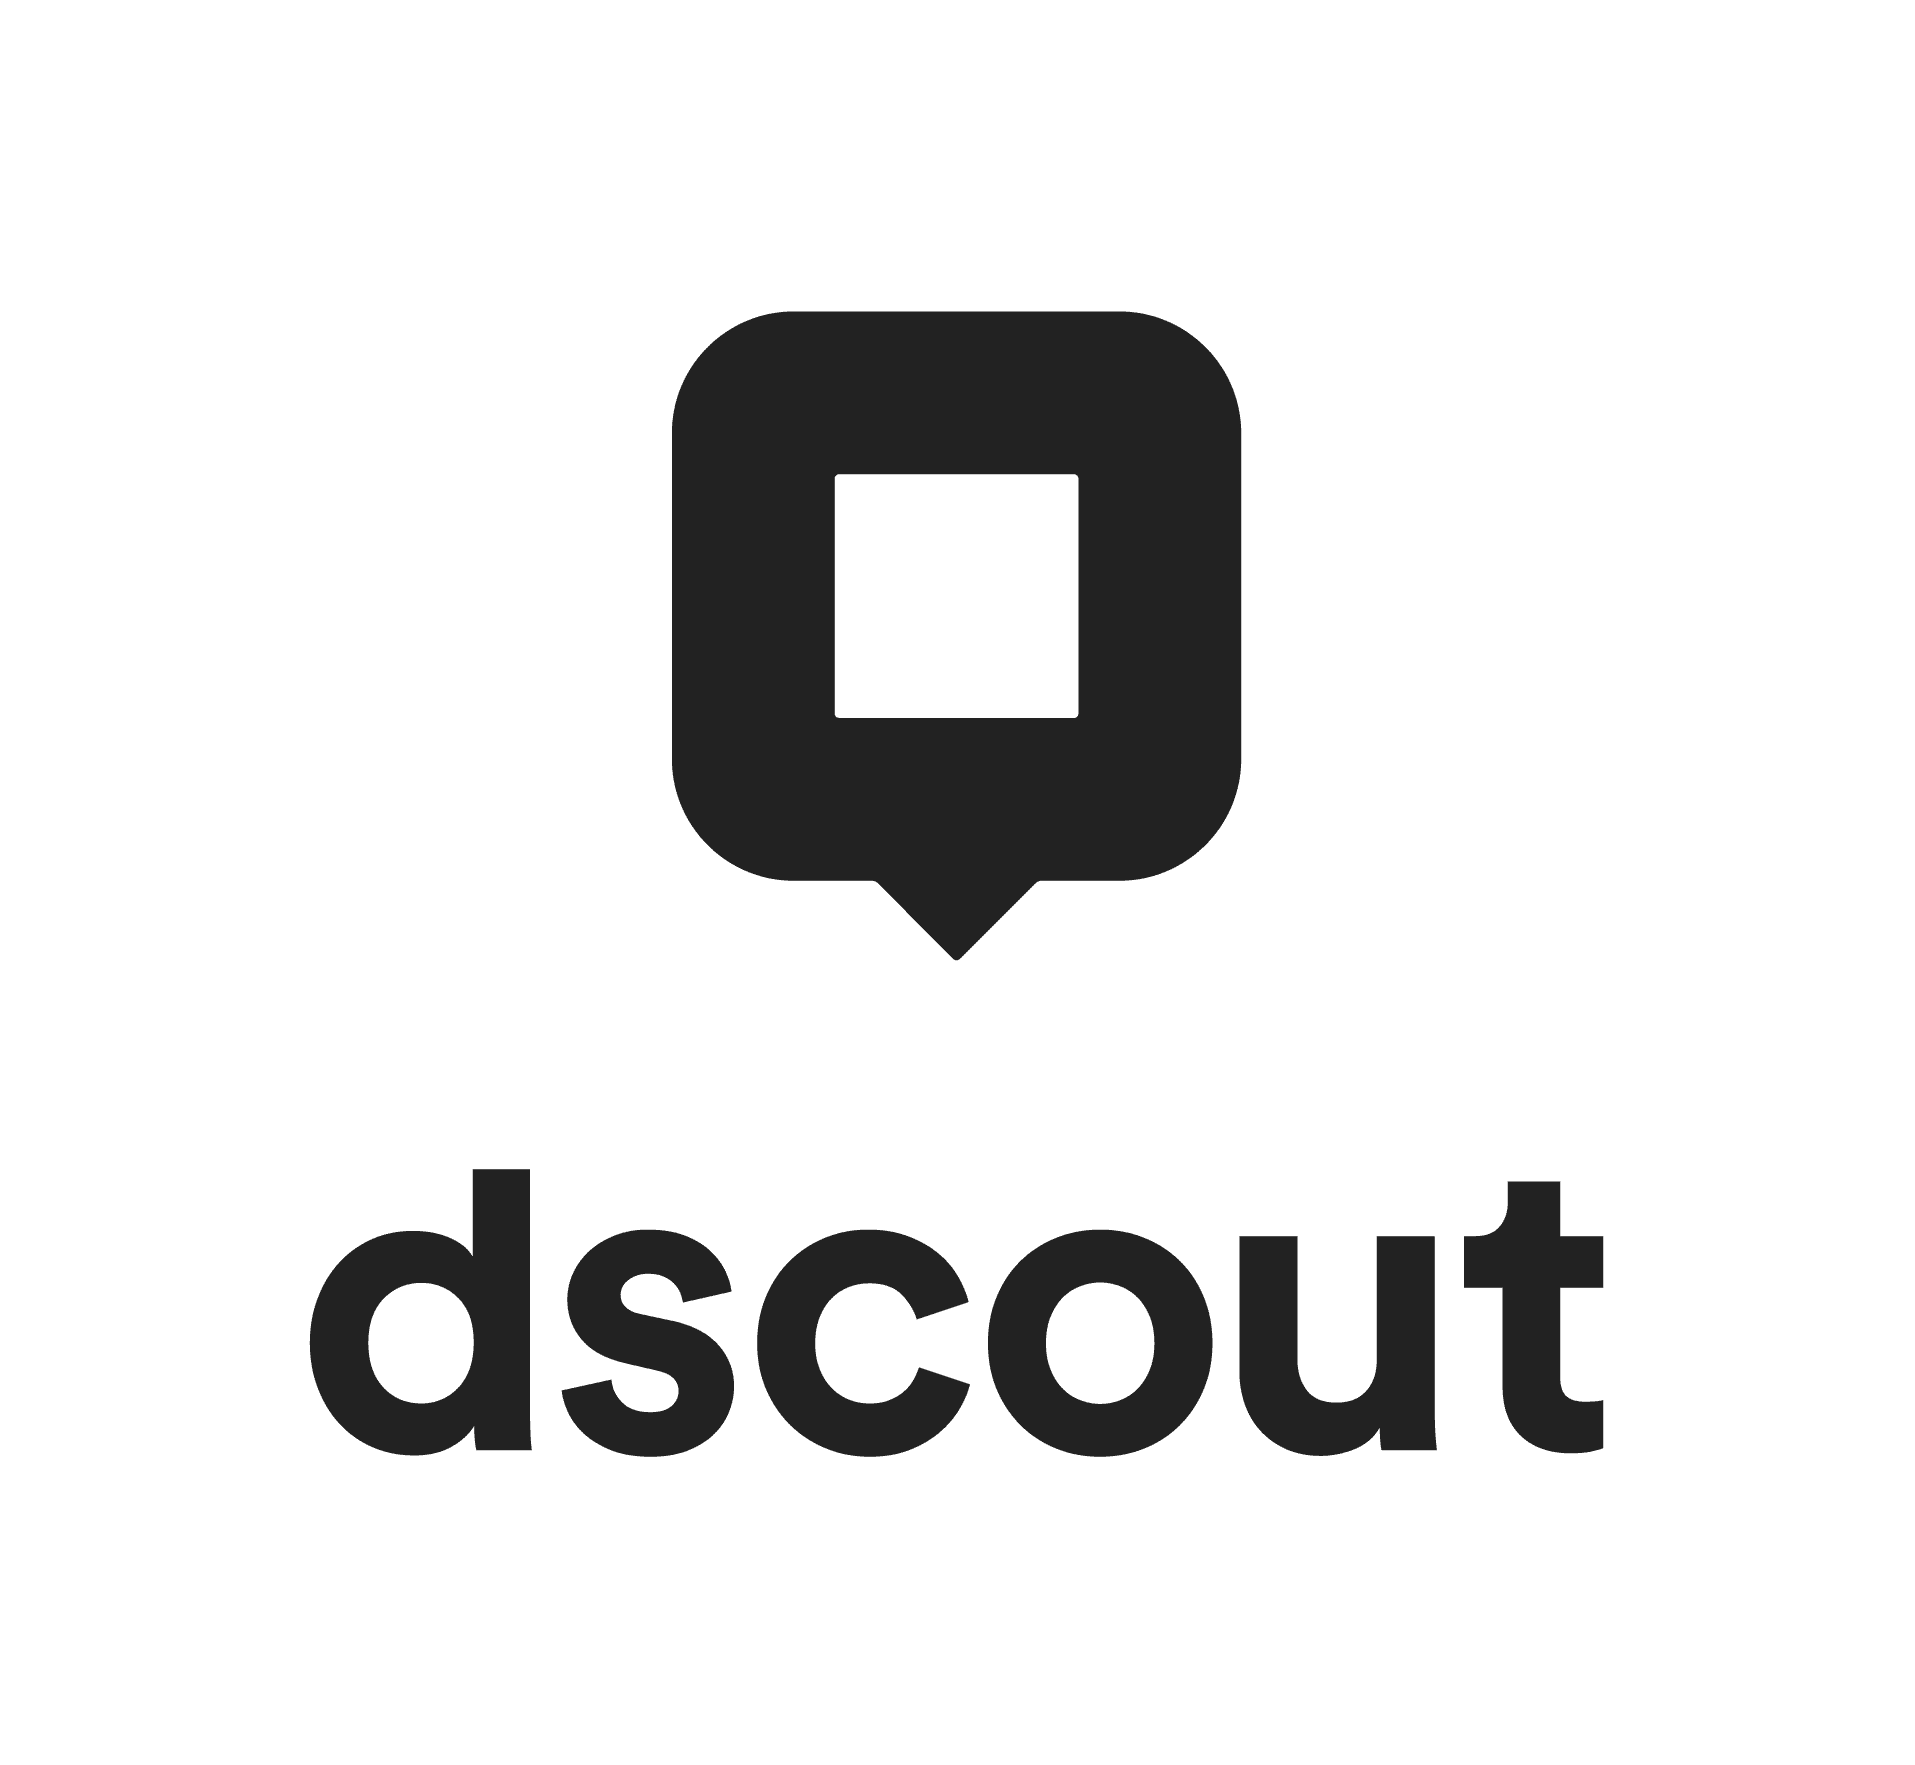 Full review of dscout App